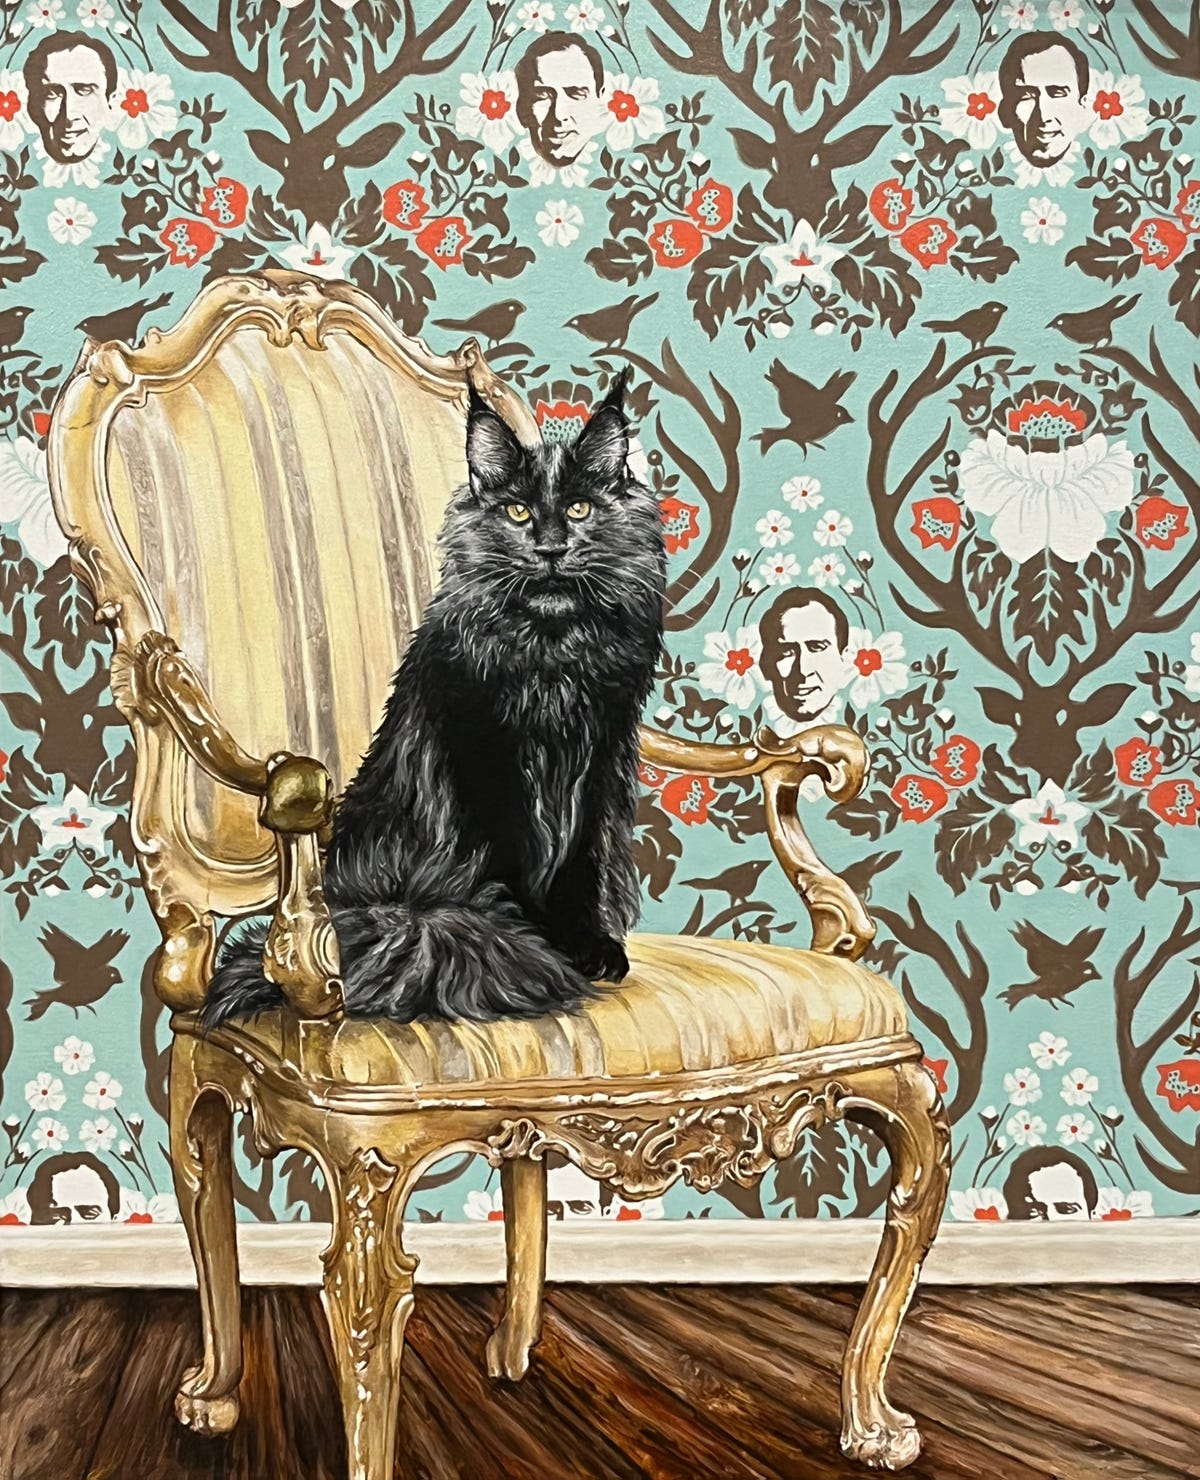 Merlin, an oil on canvas by Michael Caines, depicts Nic Cage's cat sitting in a wallpaper chair with Cage's face on it